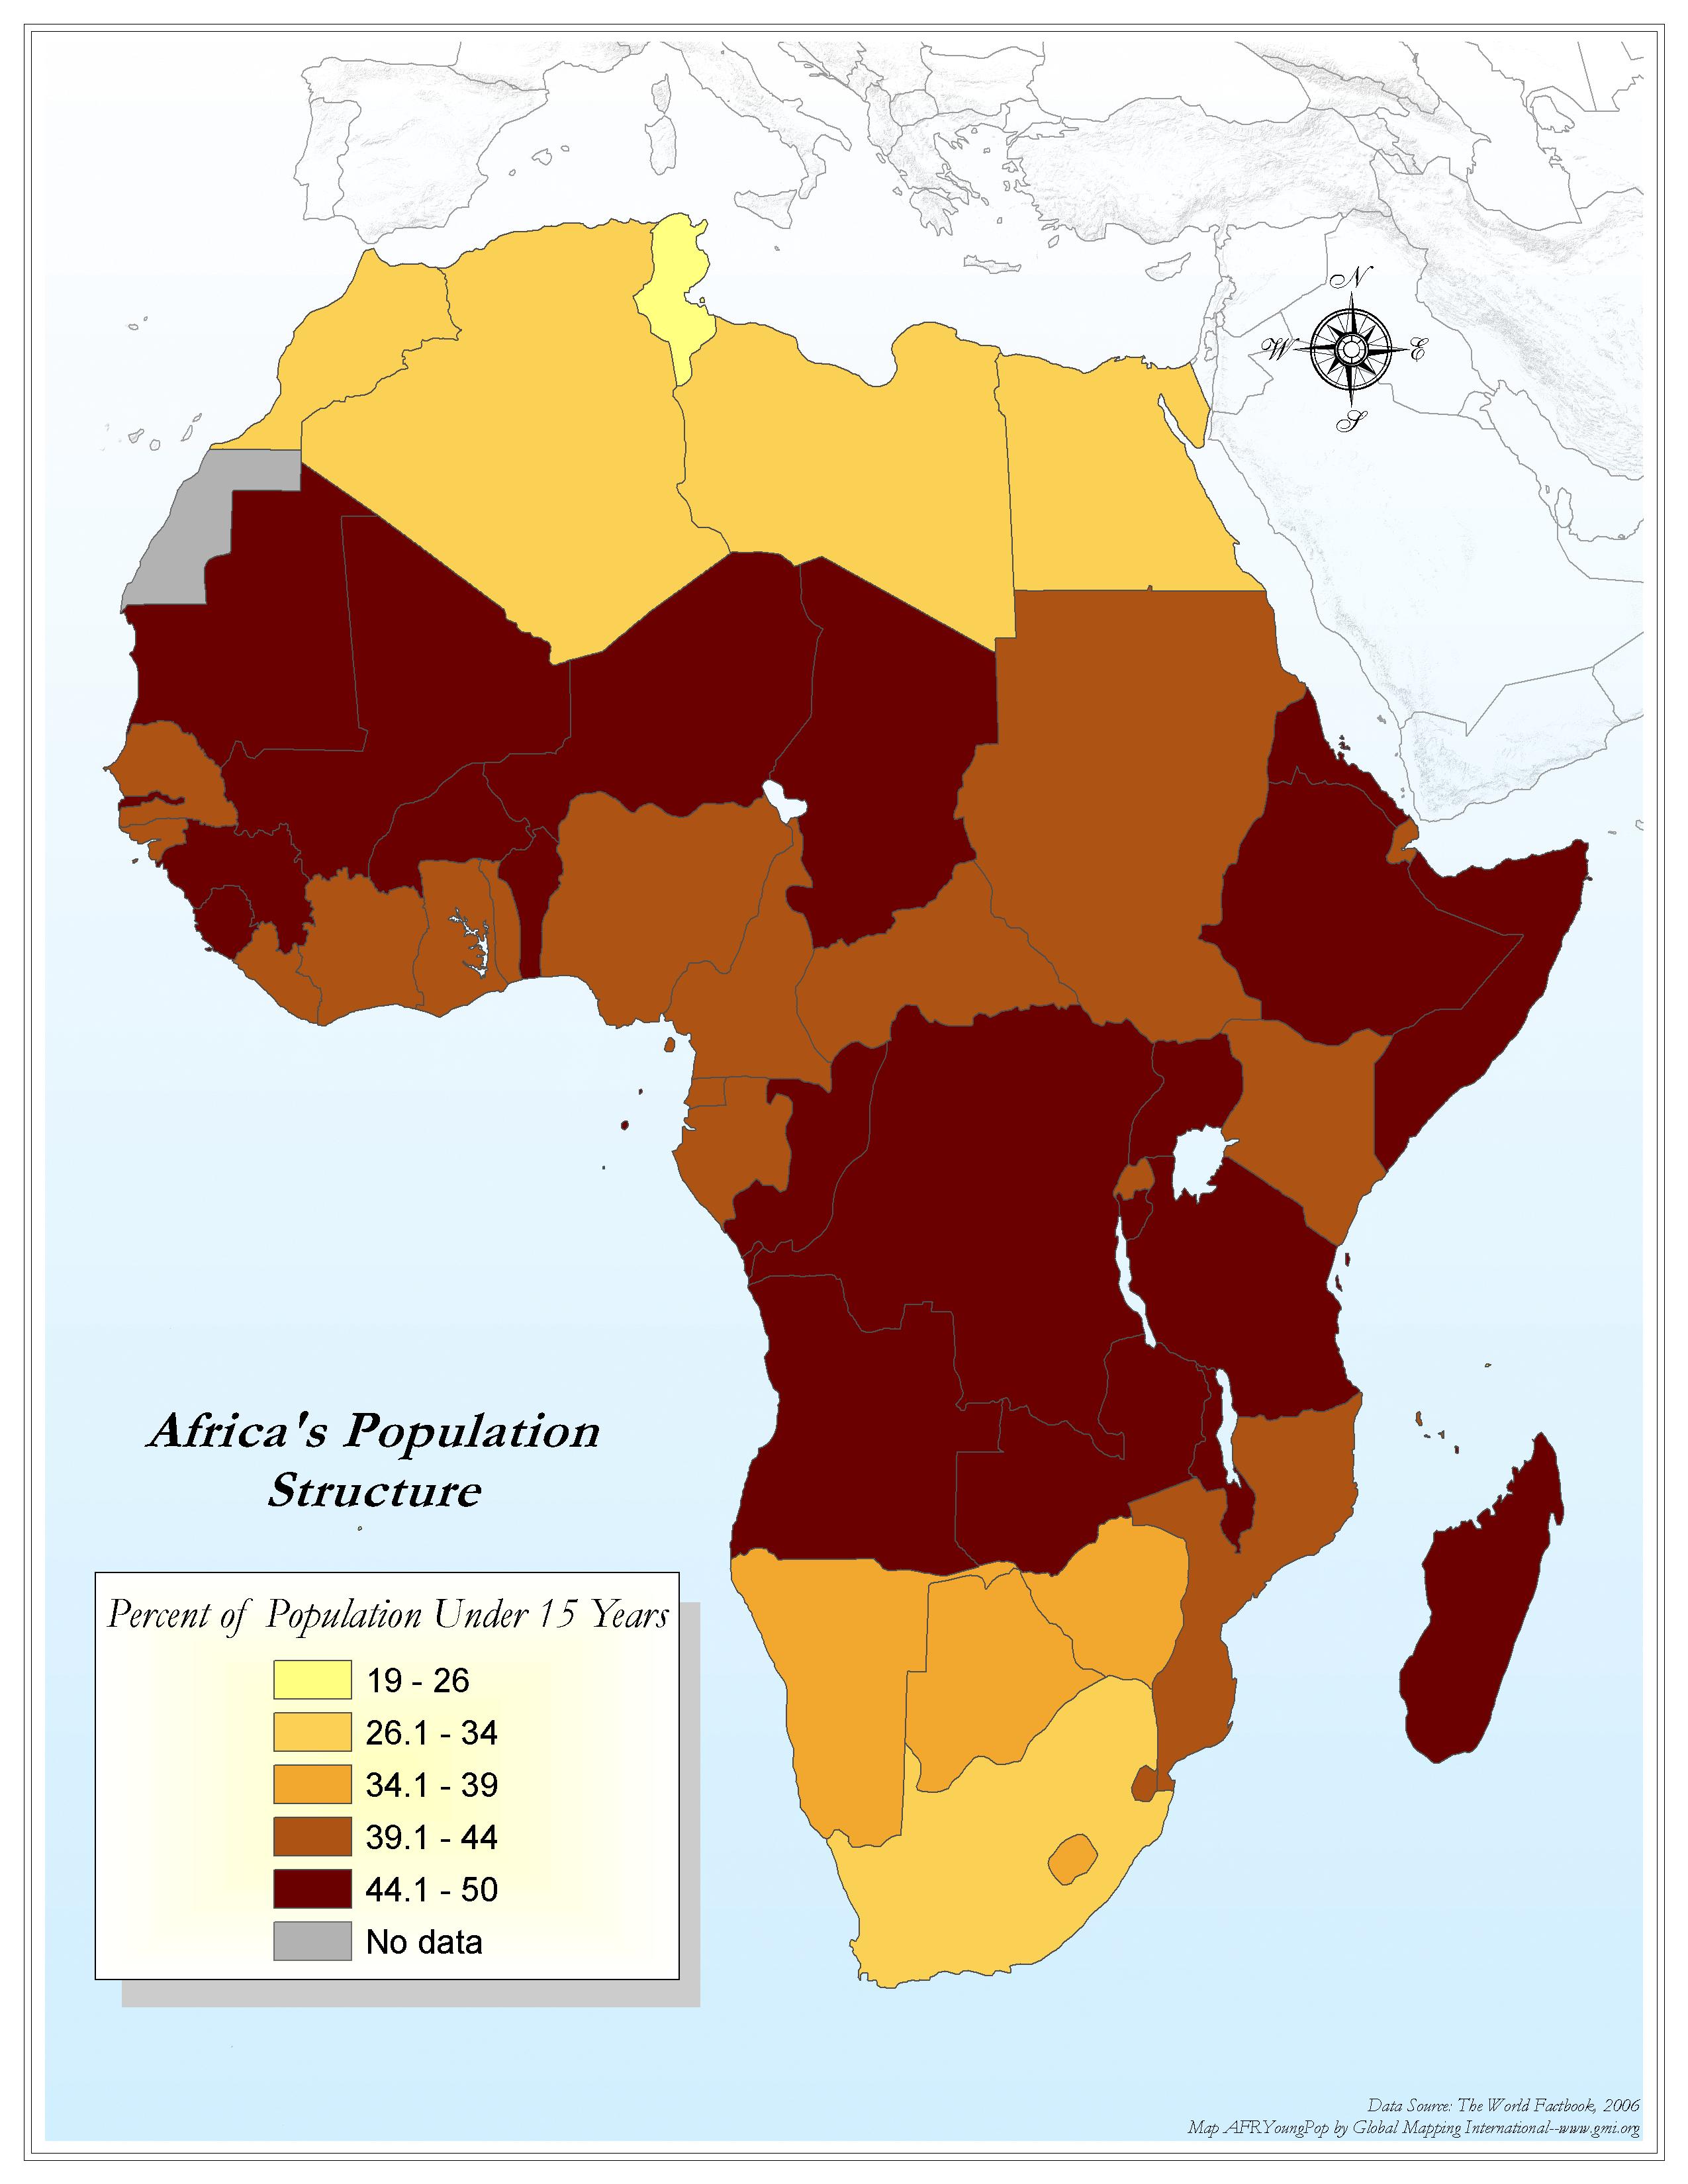 Africa's Population Structure